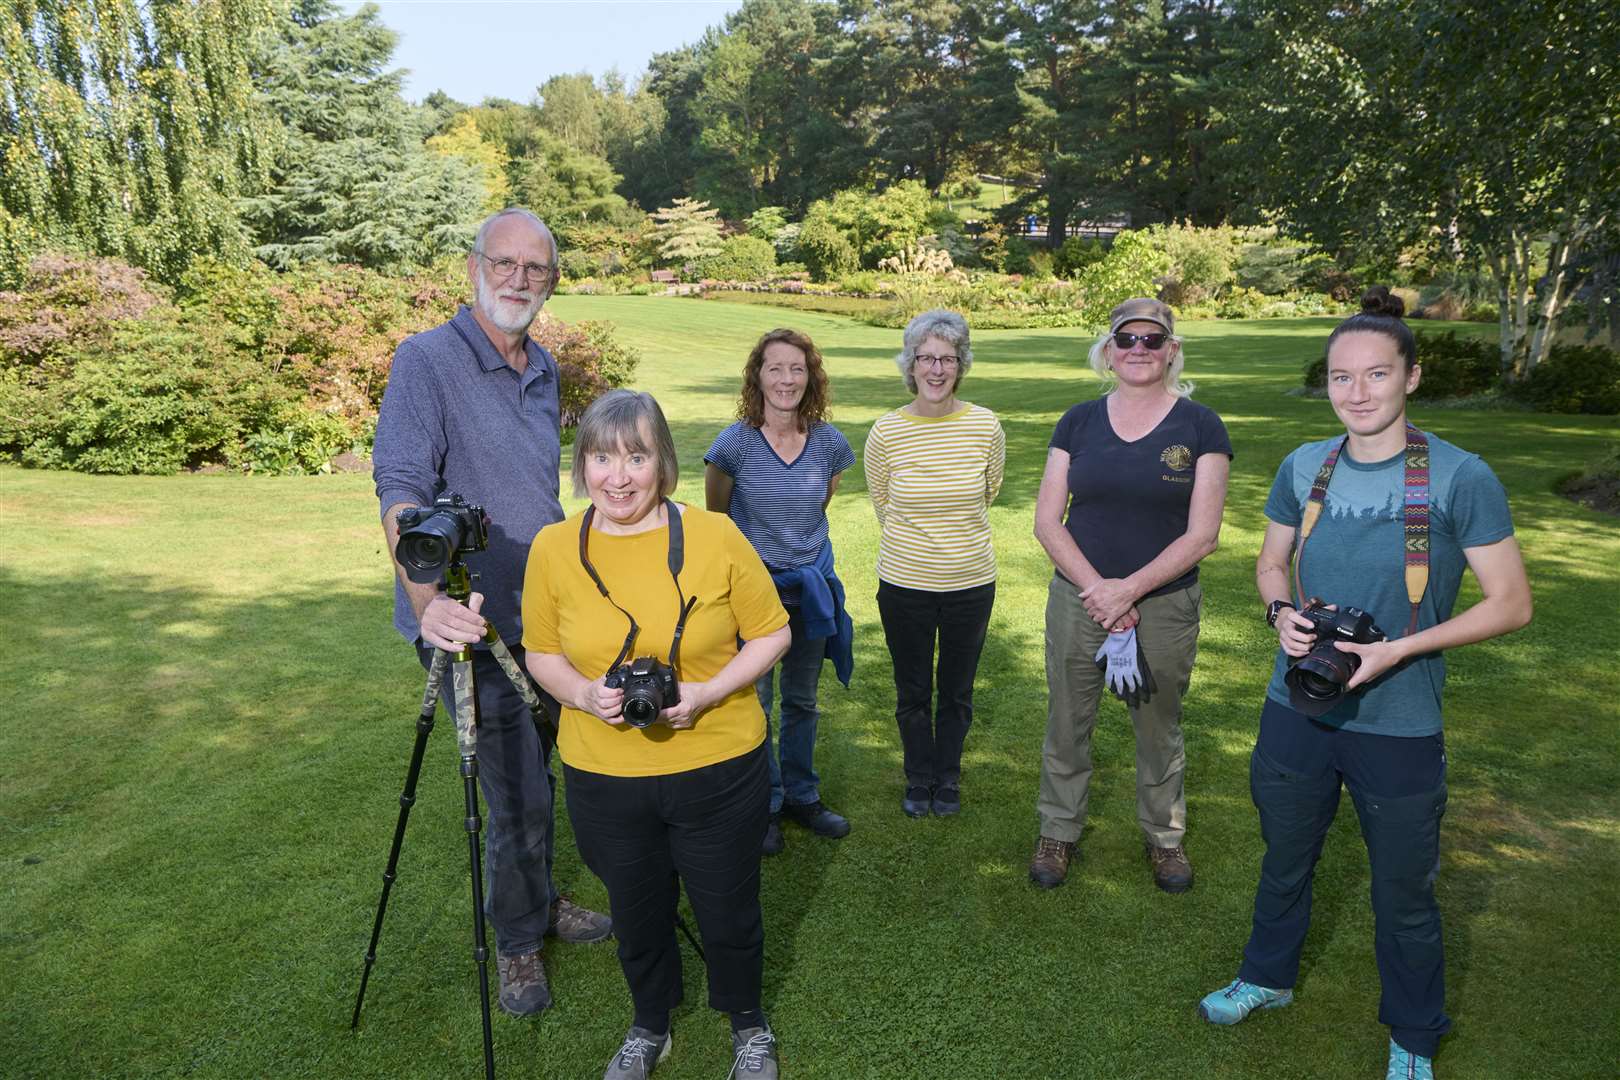 One of the garden events with (from left) nature photography lecturer Dave Freeman, keen photographer Christine Robinson, gardener Pam Cummings, organiser Anne Sutherland, head gardener Fiona Mackenzie, and another keen photographer Becky Dingwall.